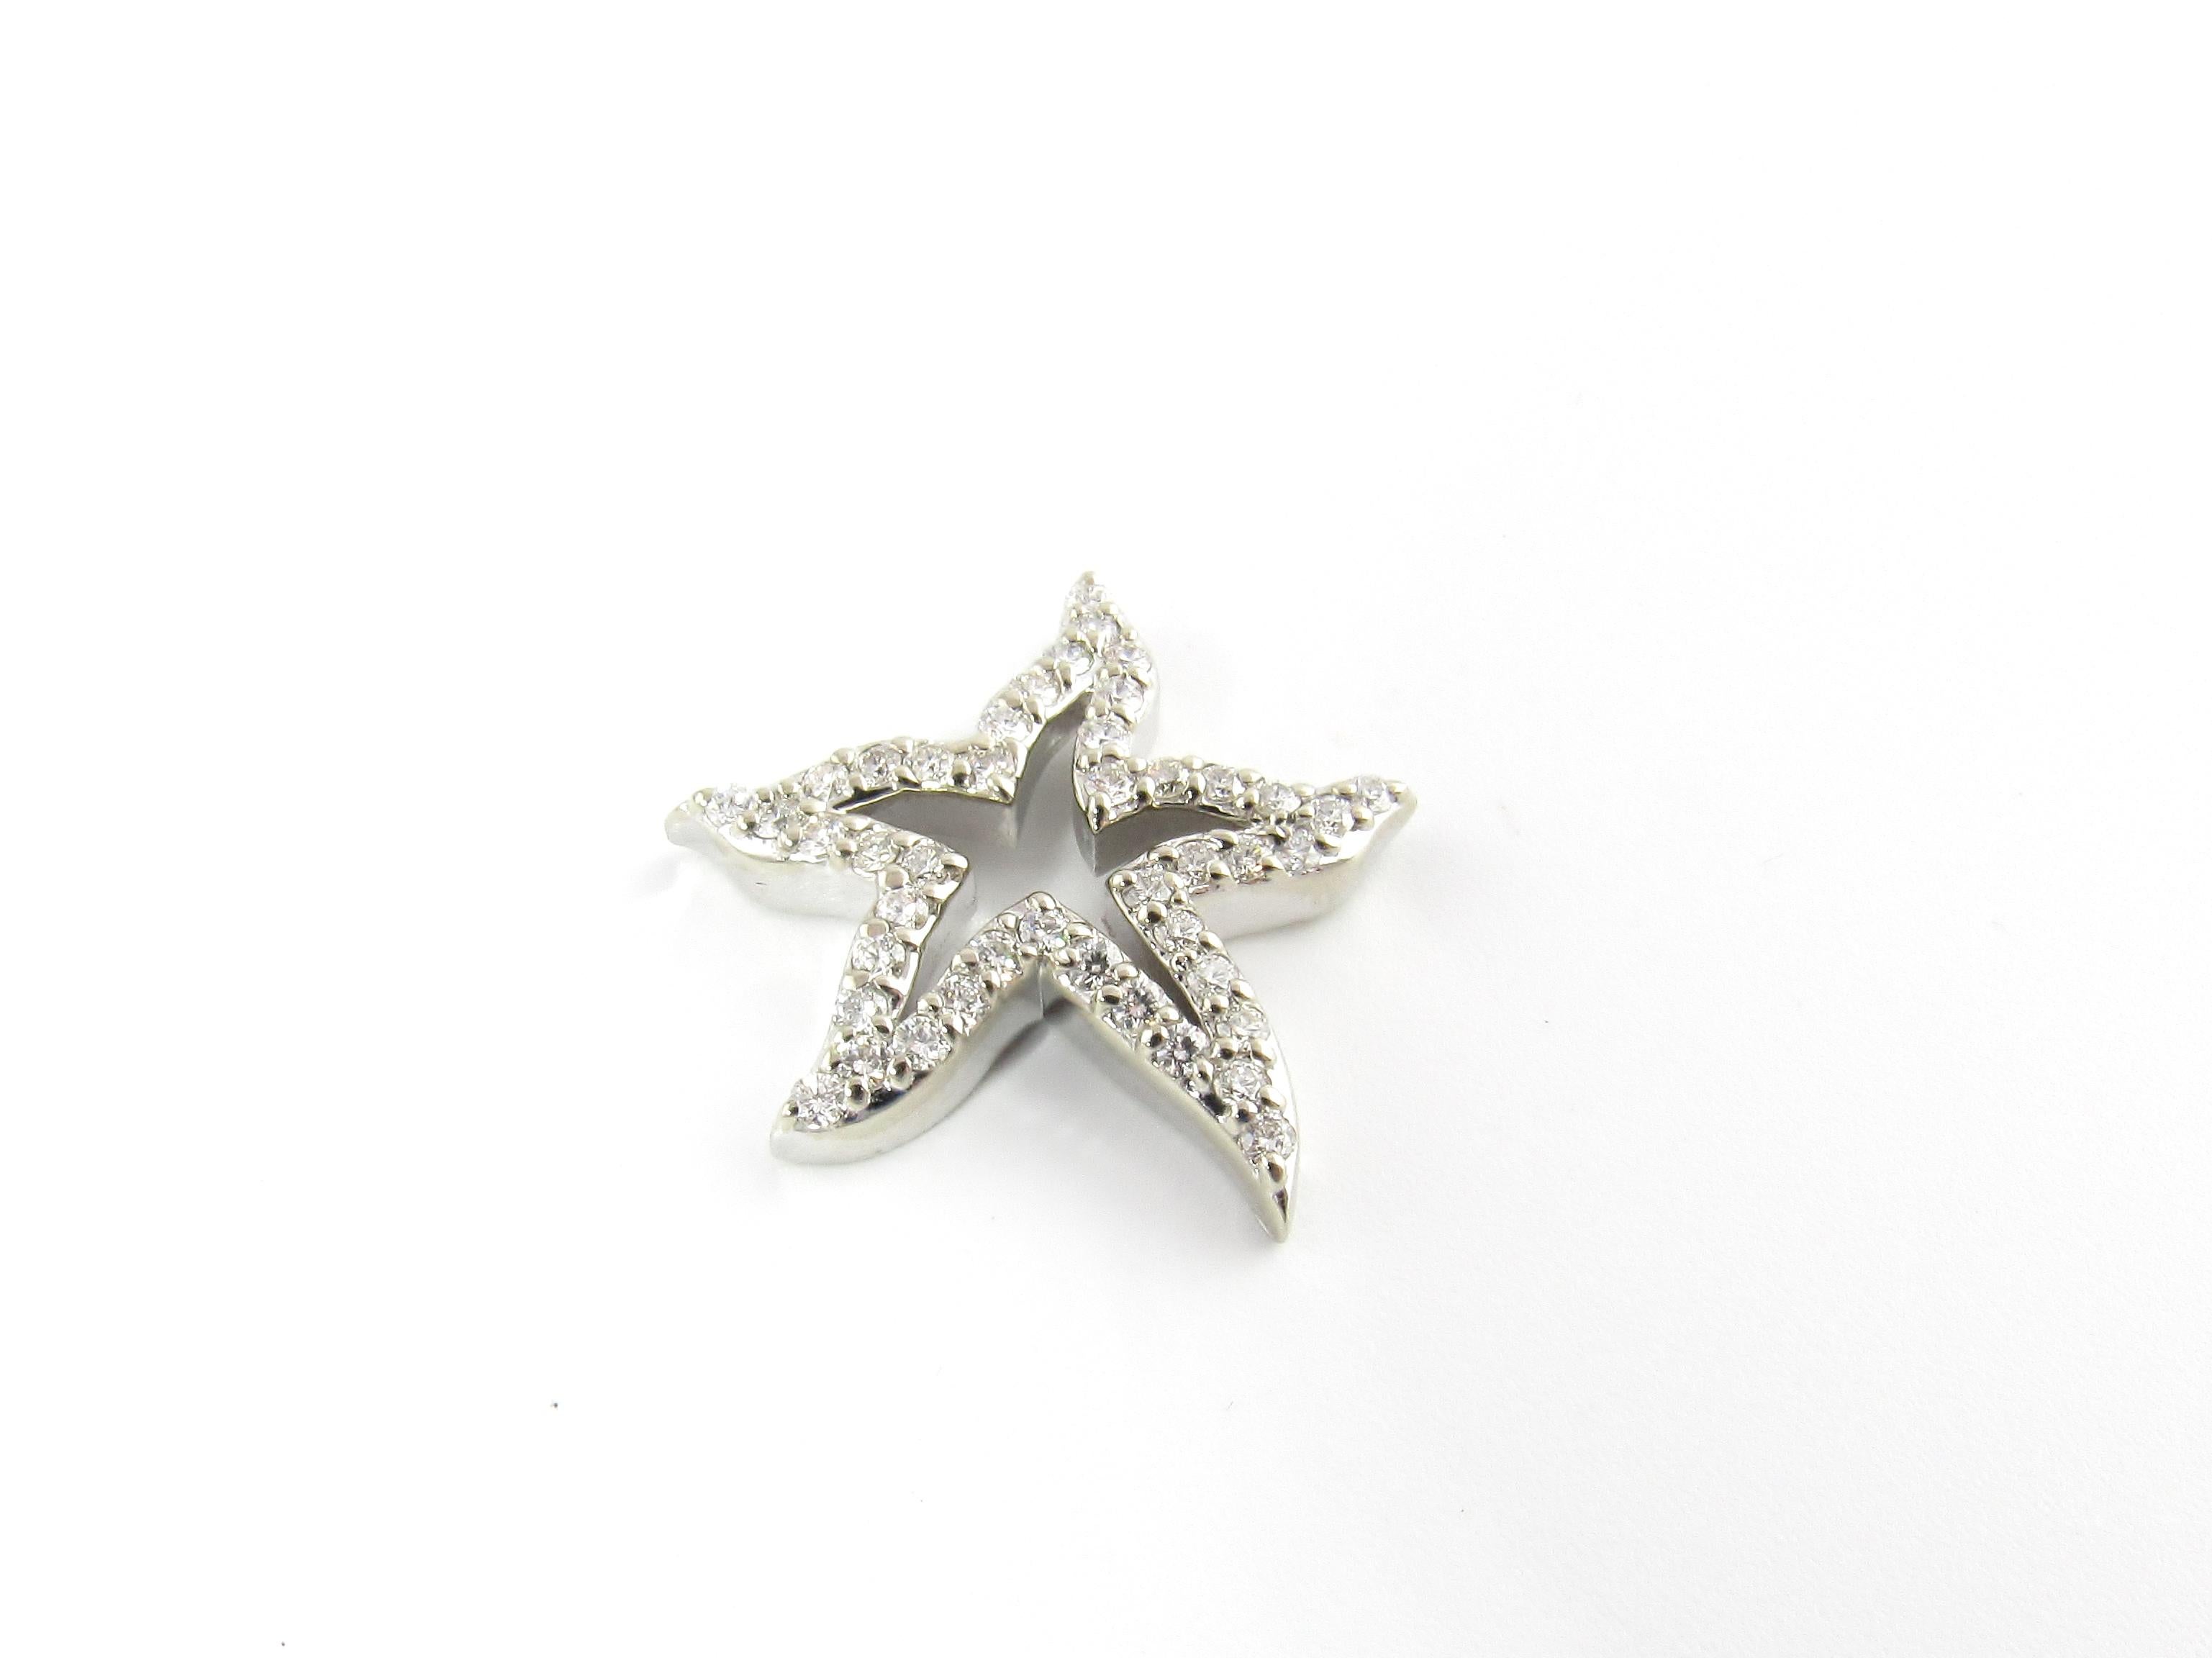 Vintage 14 Karat White Gold and Diamond Starfish Pendant

This sparkling pendant features a lovely starfish decorated with 44 round brilliant cut diamonds set in classic 14K white gold.

Approximate total diamond weight: .44 ct.

Diamond color: